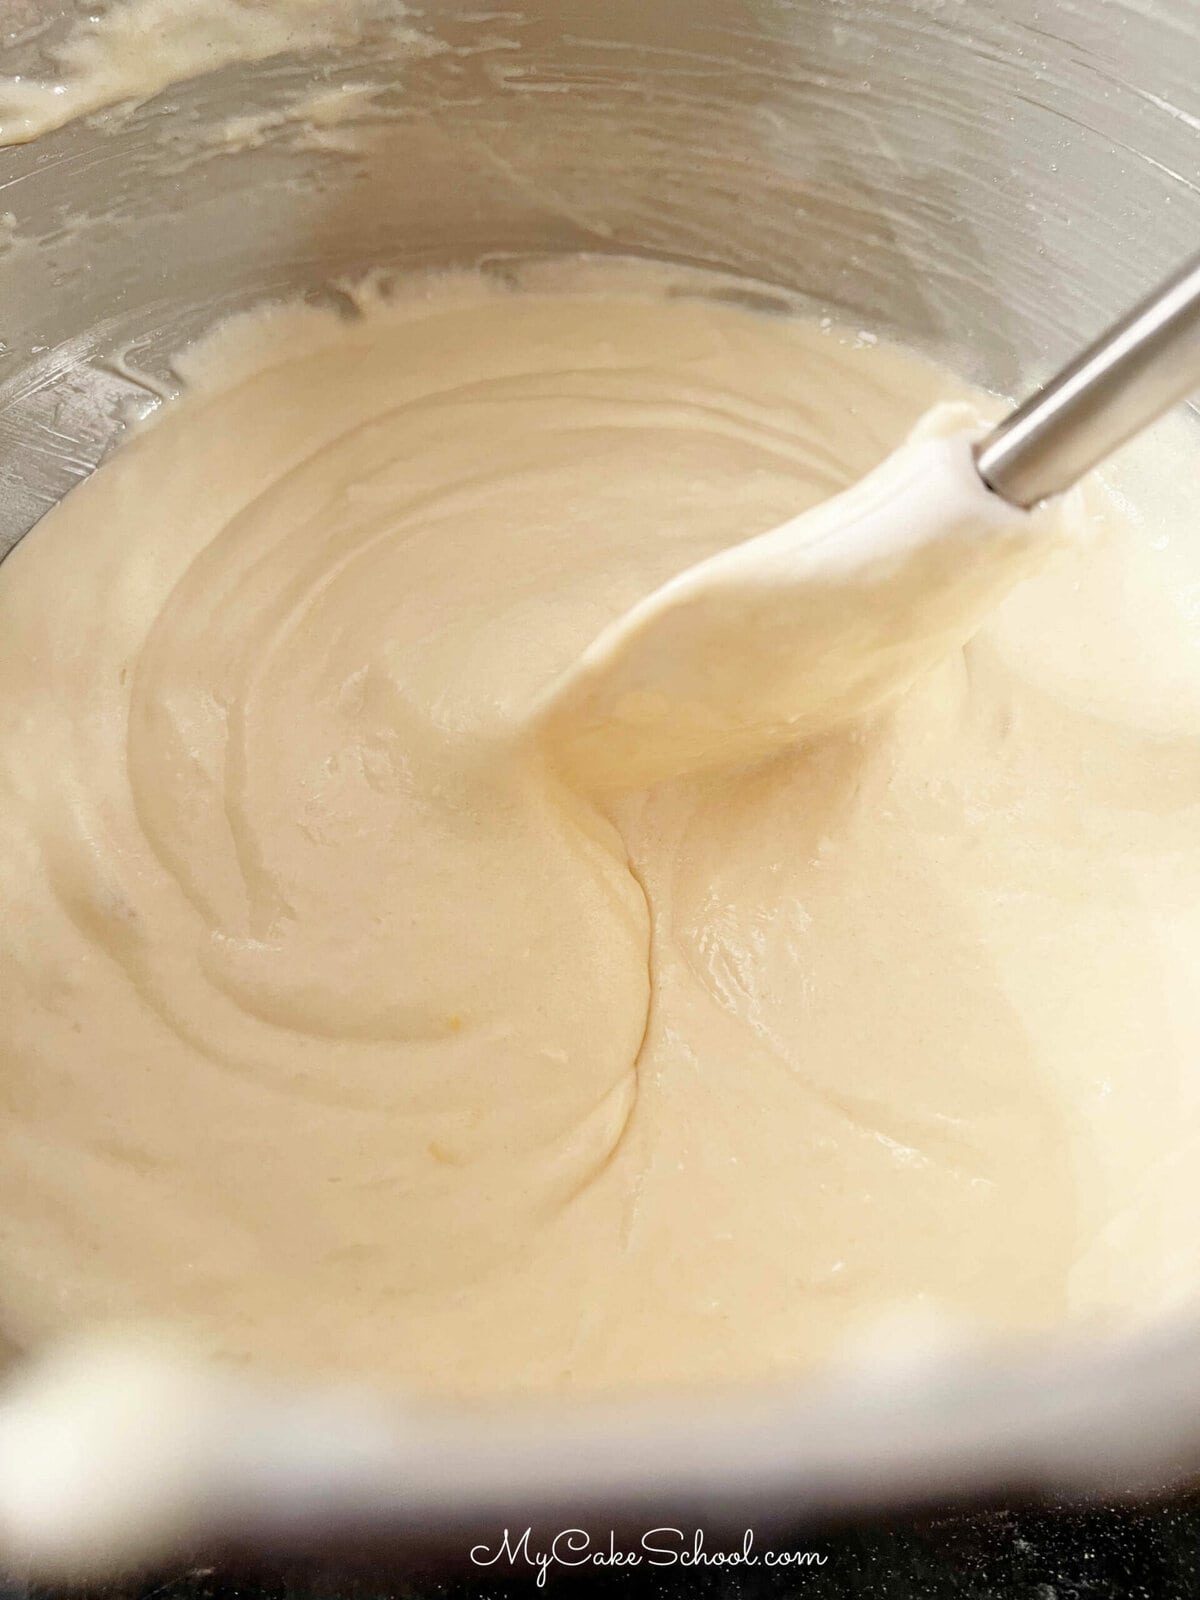 Cake Batter in mixing bowl with spatula.